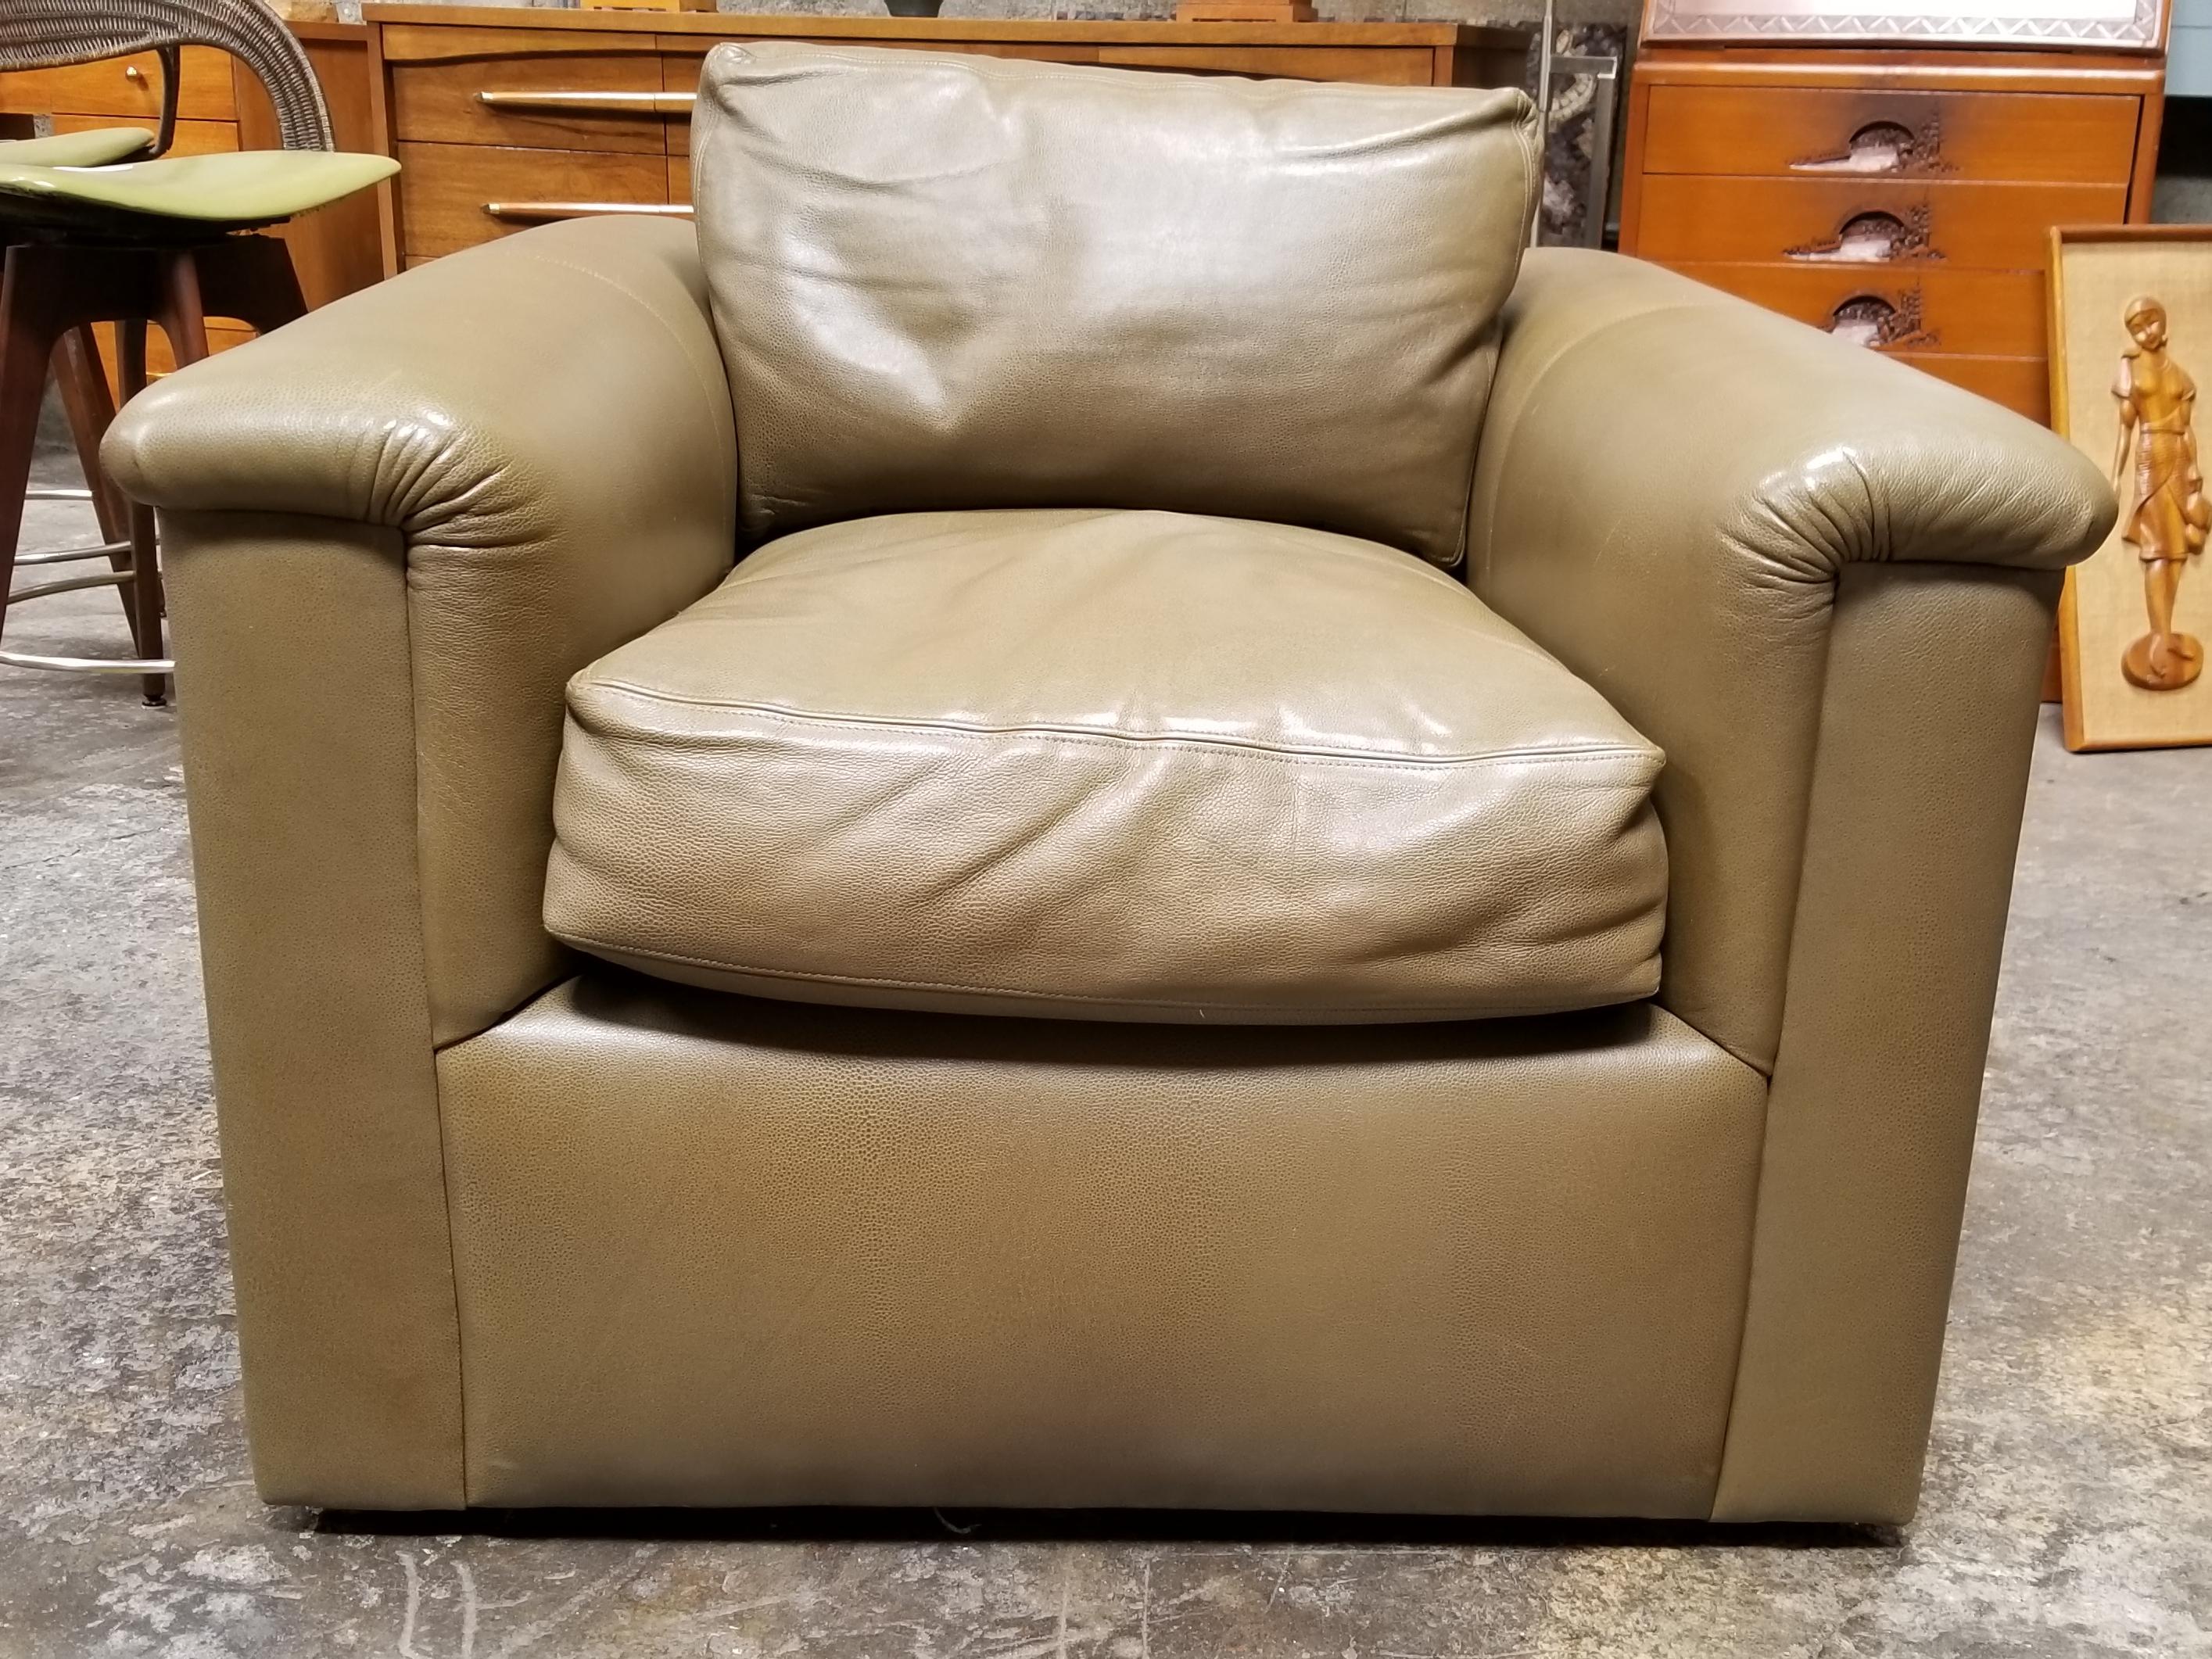 Fine quality leather lounge chair designed by Sally Sirkin Lewis for J. Robert Scott. Swivel feature.

J. Robert Scott:

J. Robert Scott, Inc. the luxury home furnishings manufacturer was founded in 1972 in Los Angeles by Hall of Fame designer